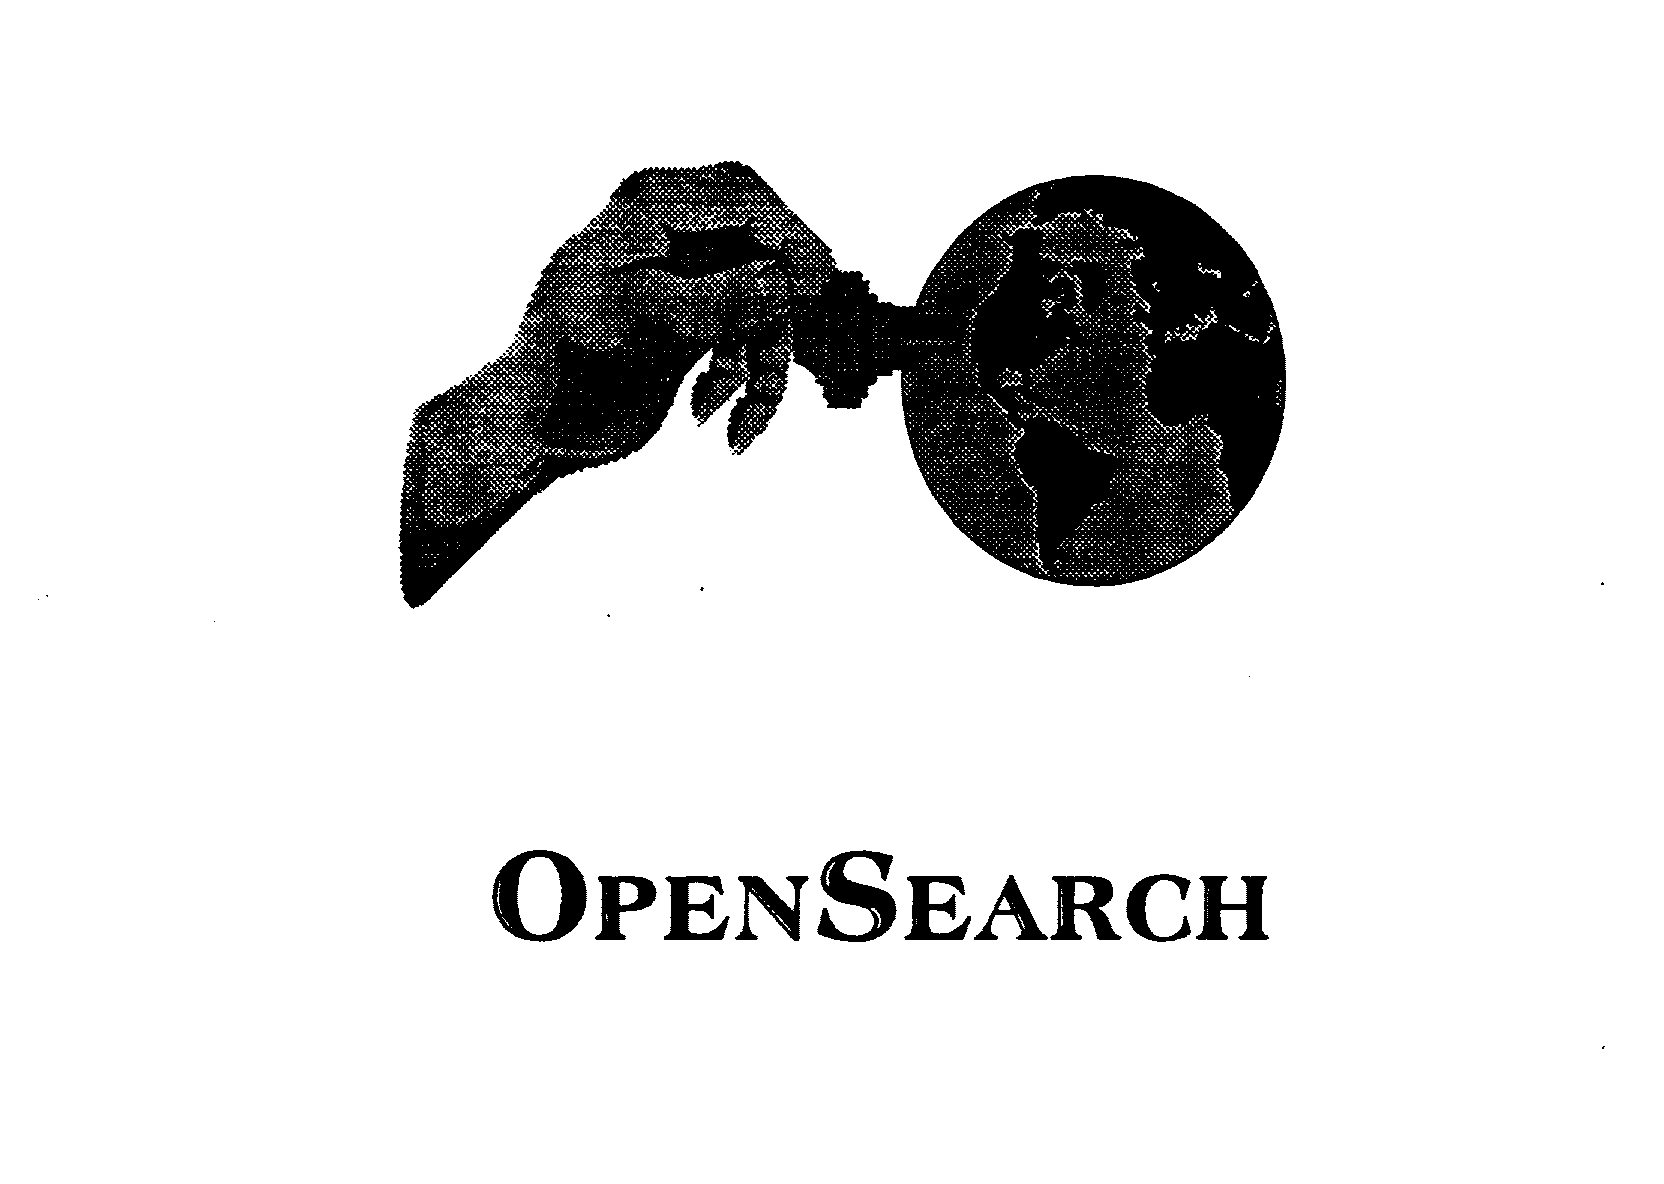 OPENSEARCH